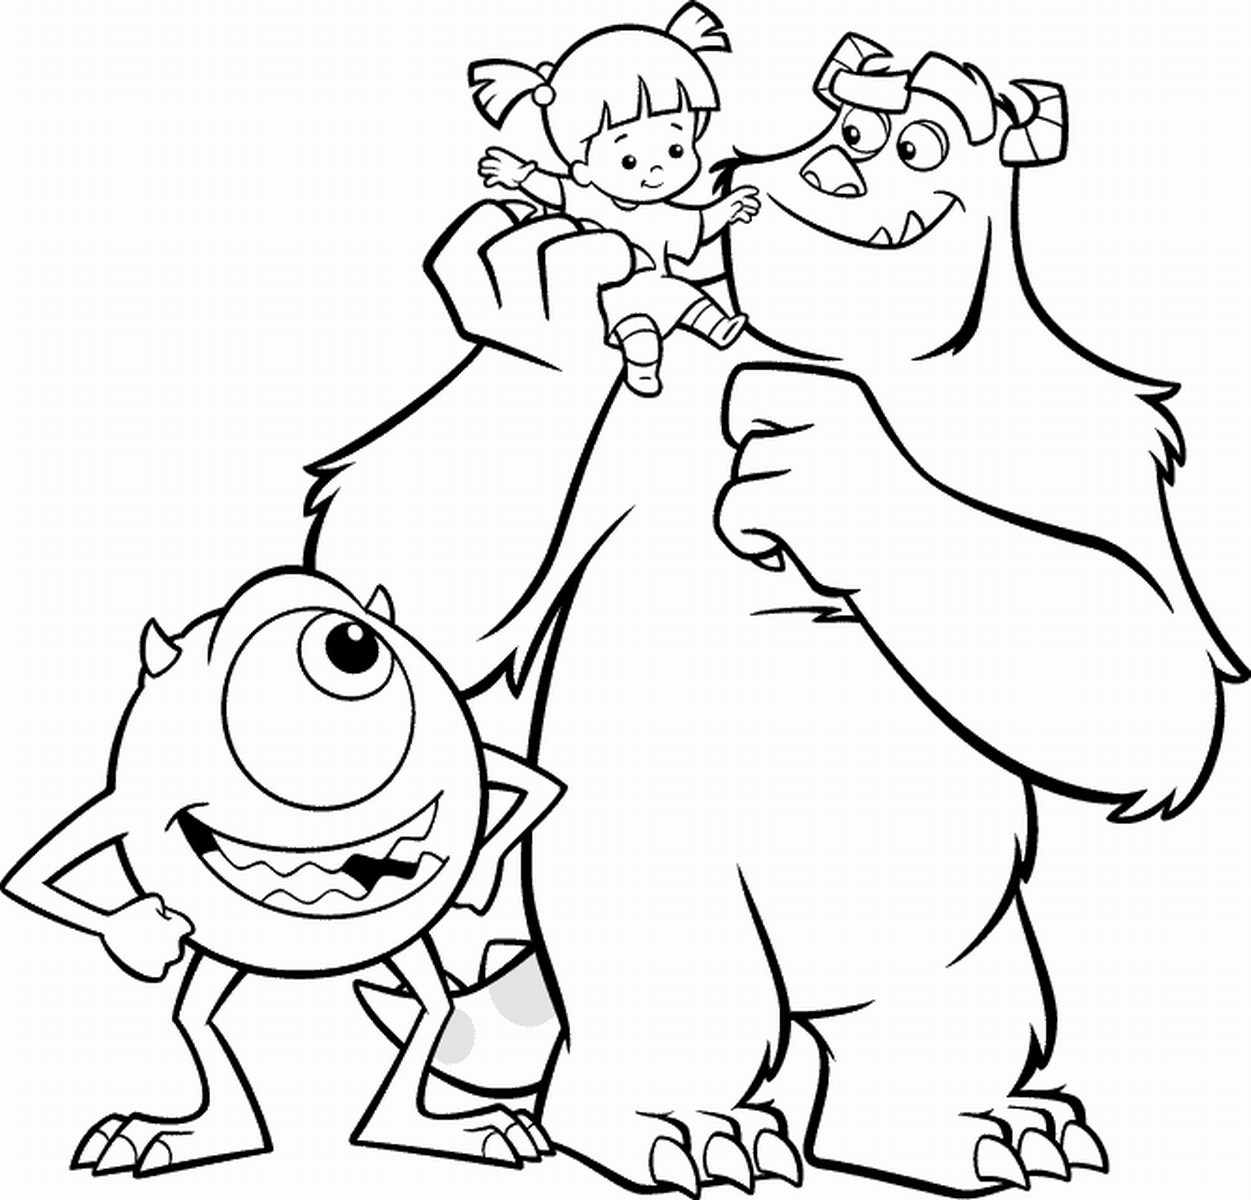 monsters inc coloring page monsters inc coloring pages best coloring pages for kids page coloring inc monsters 